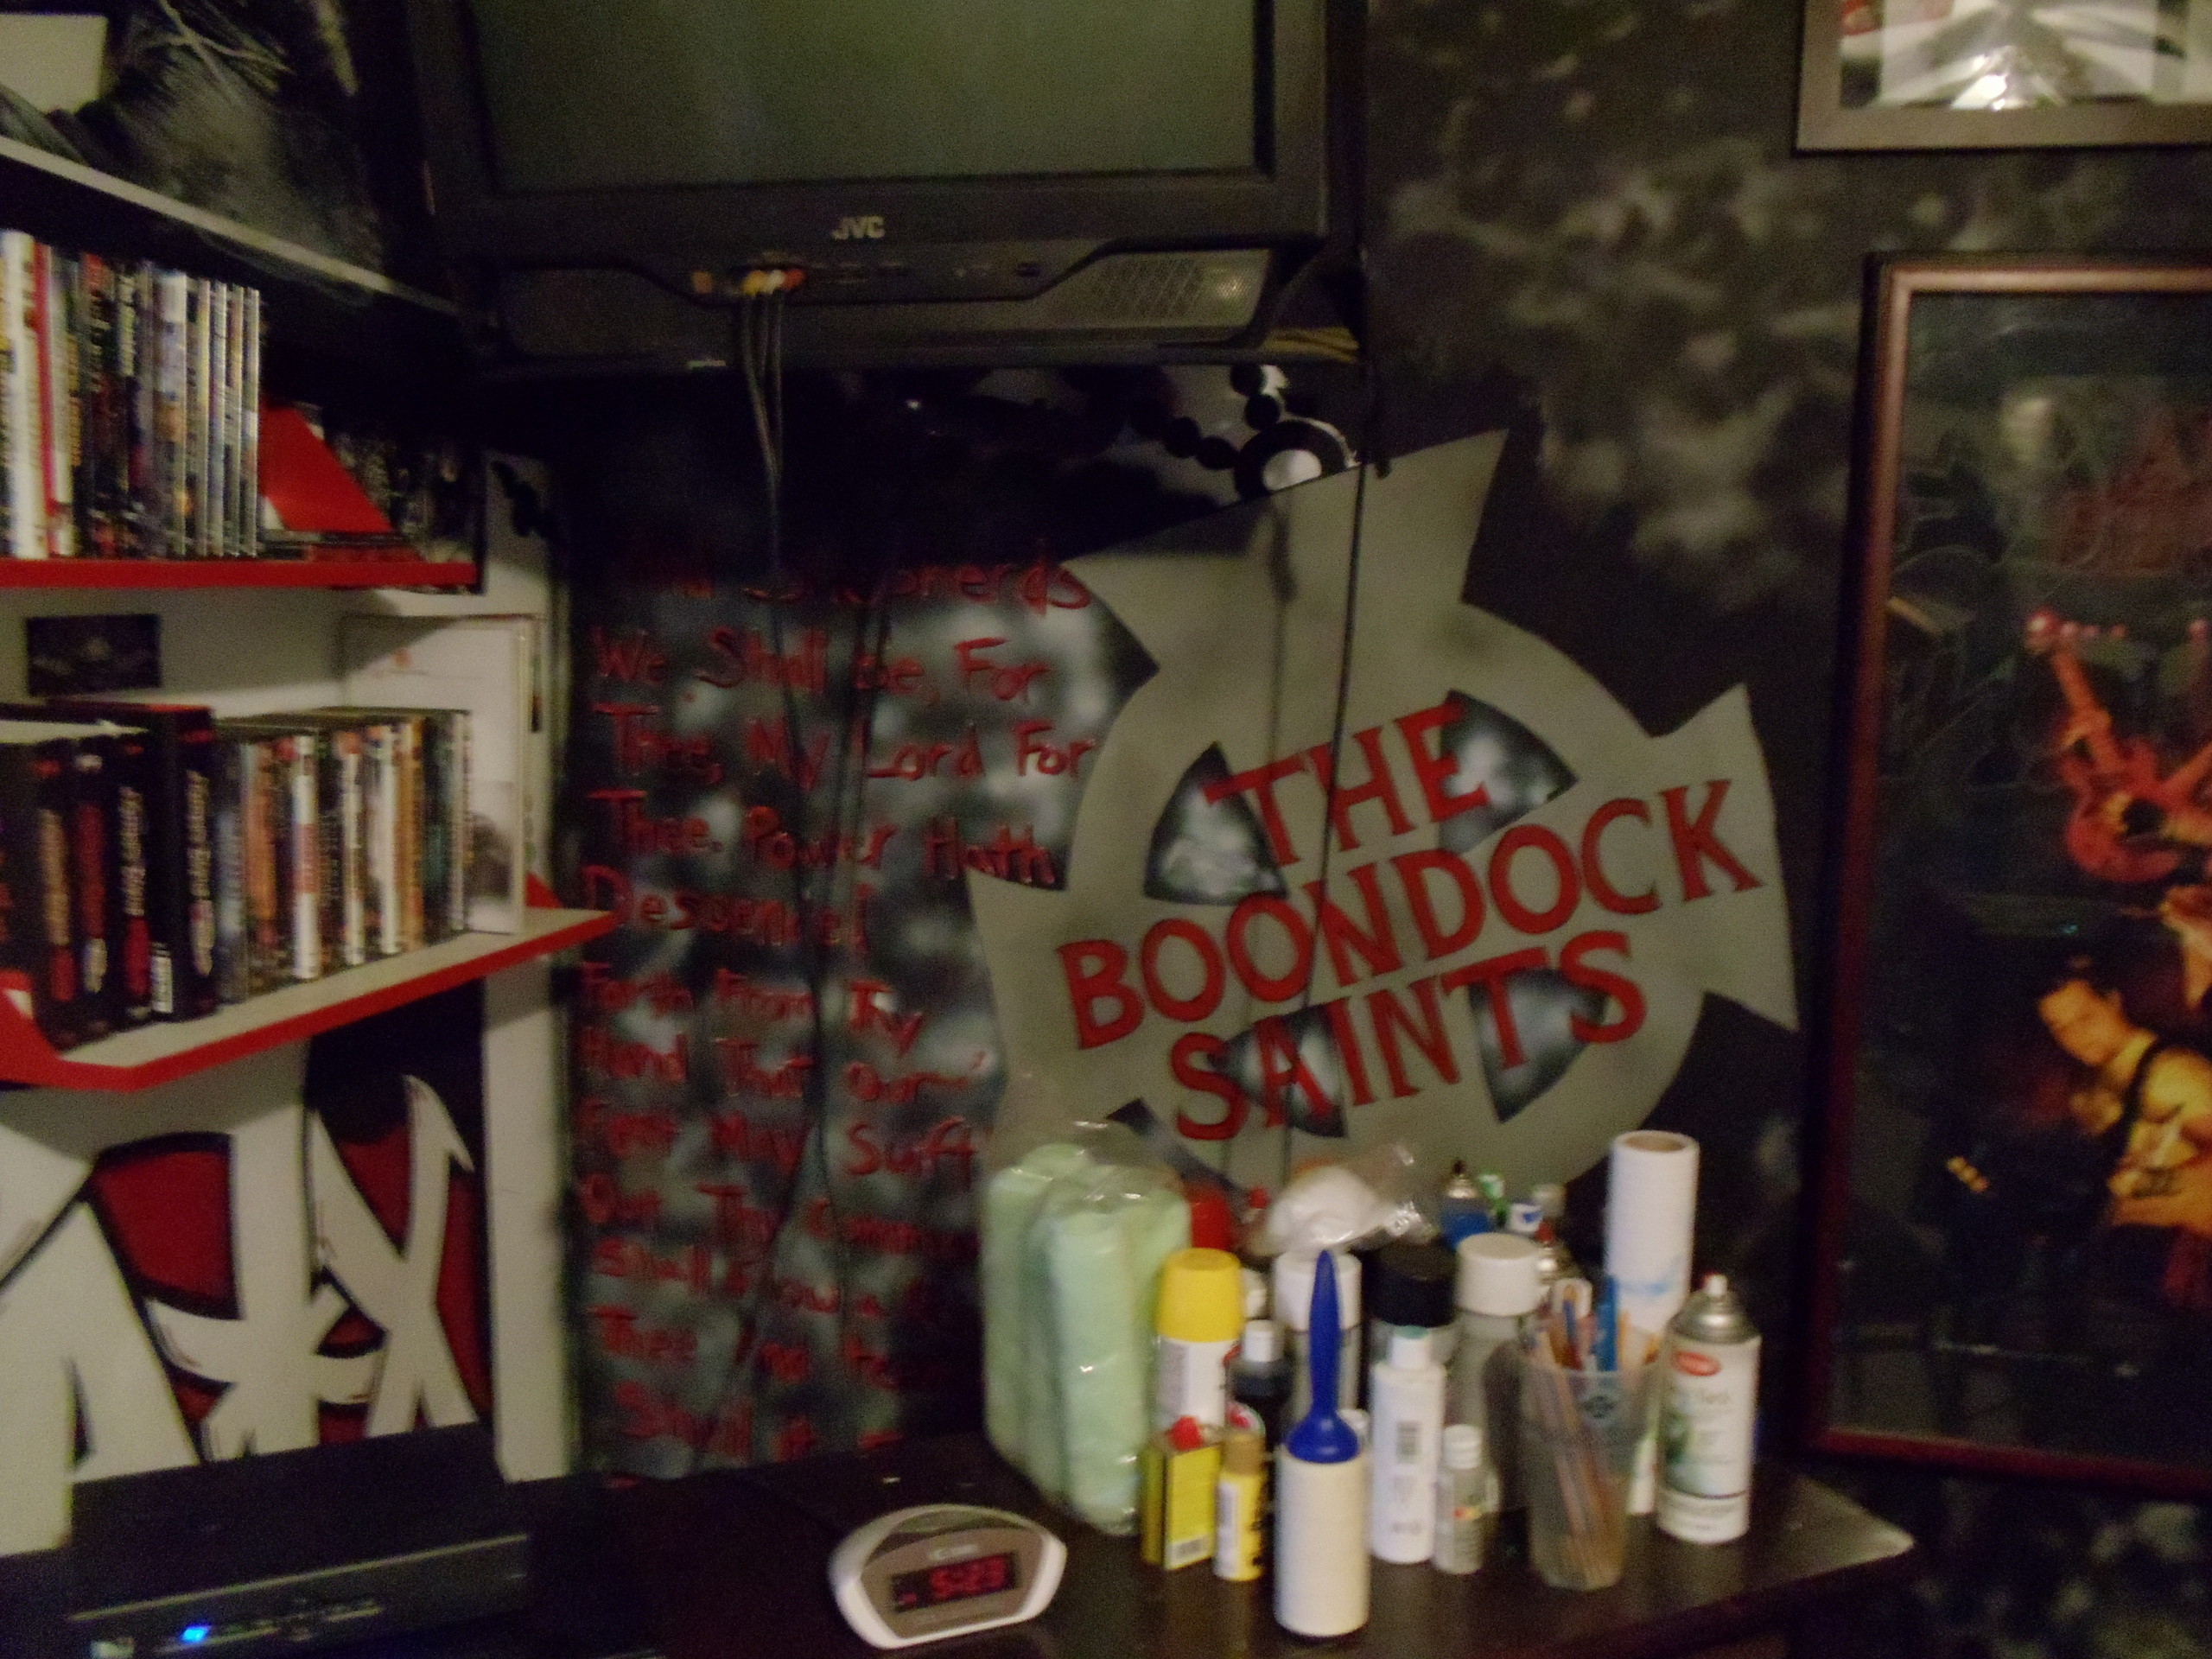 2560x1920 The Boondock Saints images Spray Painting I made of The Boondock Saints  Cross in My Room with prayer from the movie on the side HD wallpaper and  background ...